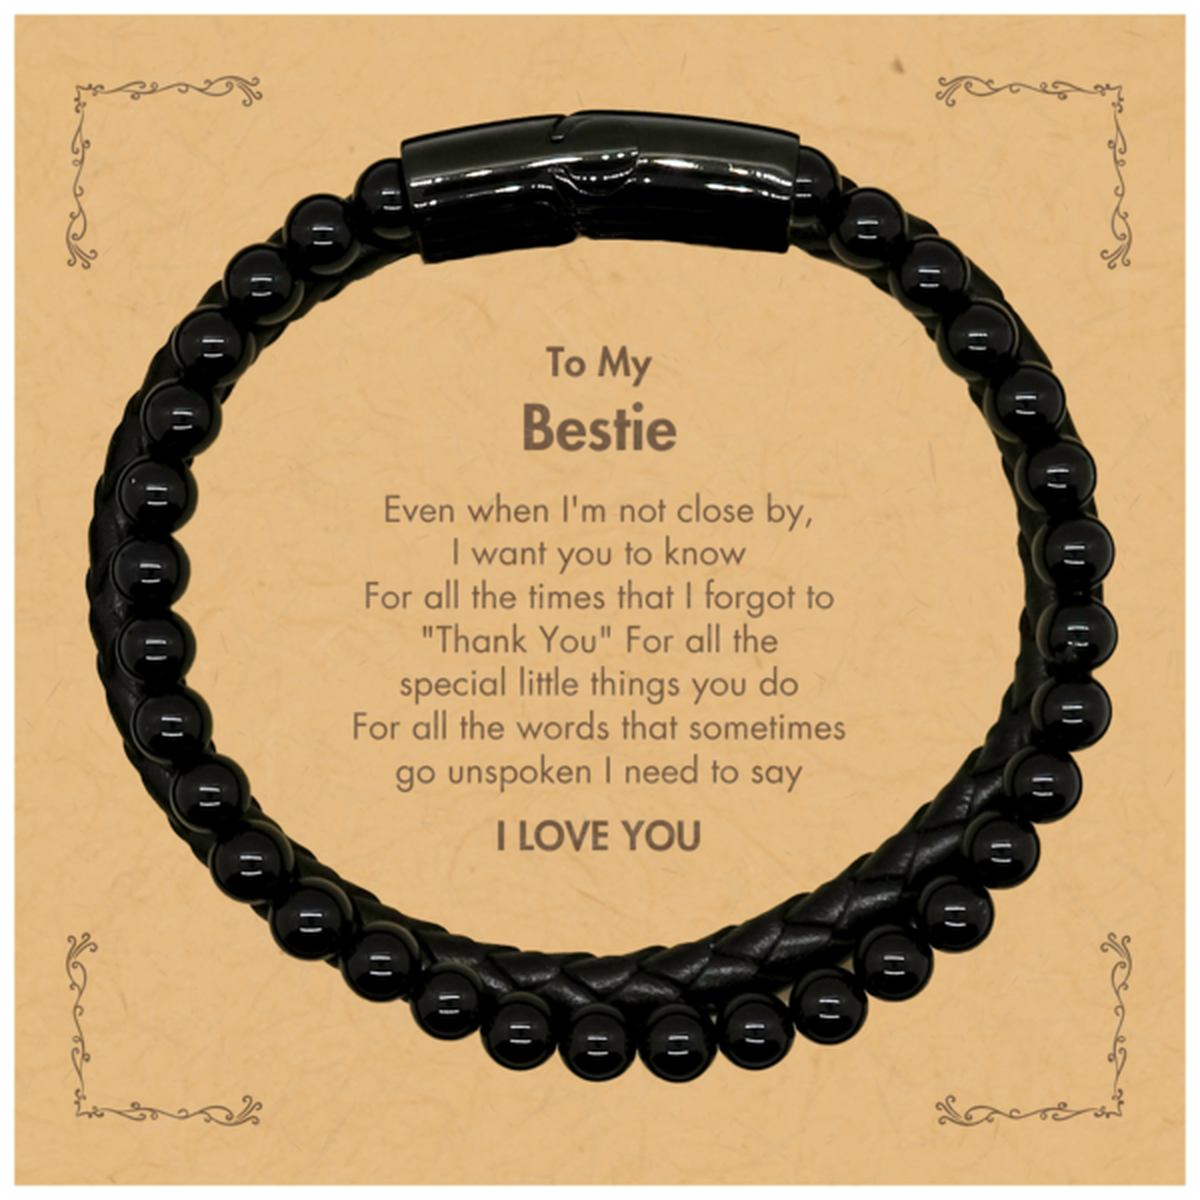 Thank You Gifts for Bestie, Keepsake Stone Leather Bracelets Gifts for Bestie Birthday Mother's day Father's Day Bestie For all the words That sometimes go unspoken I need to say I LOVE YOU